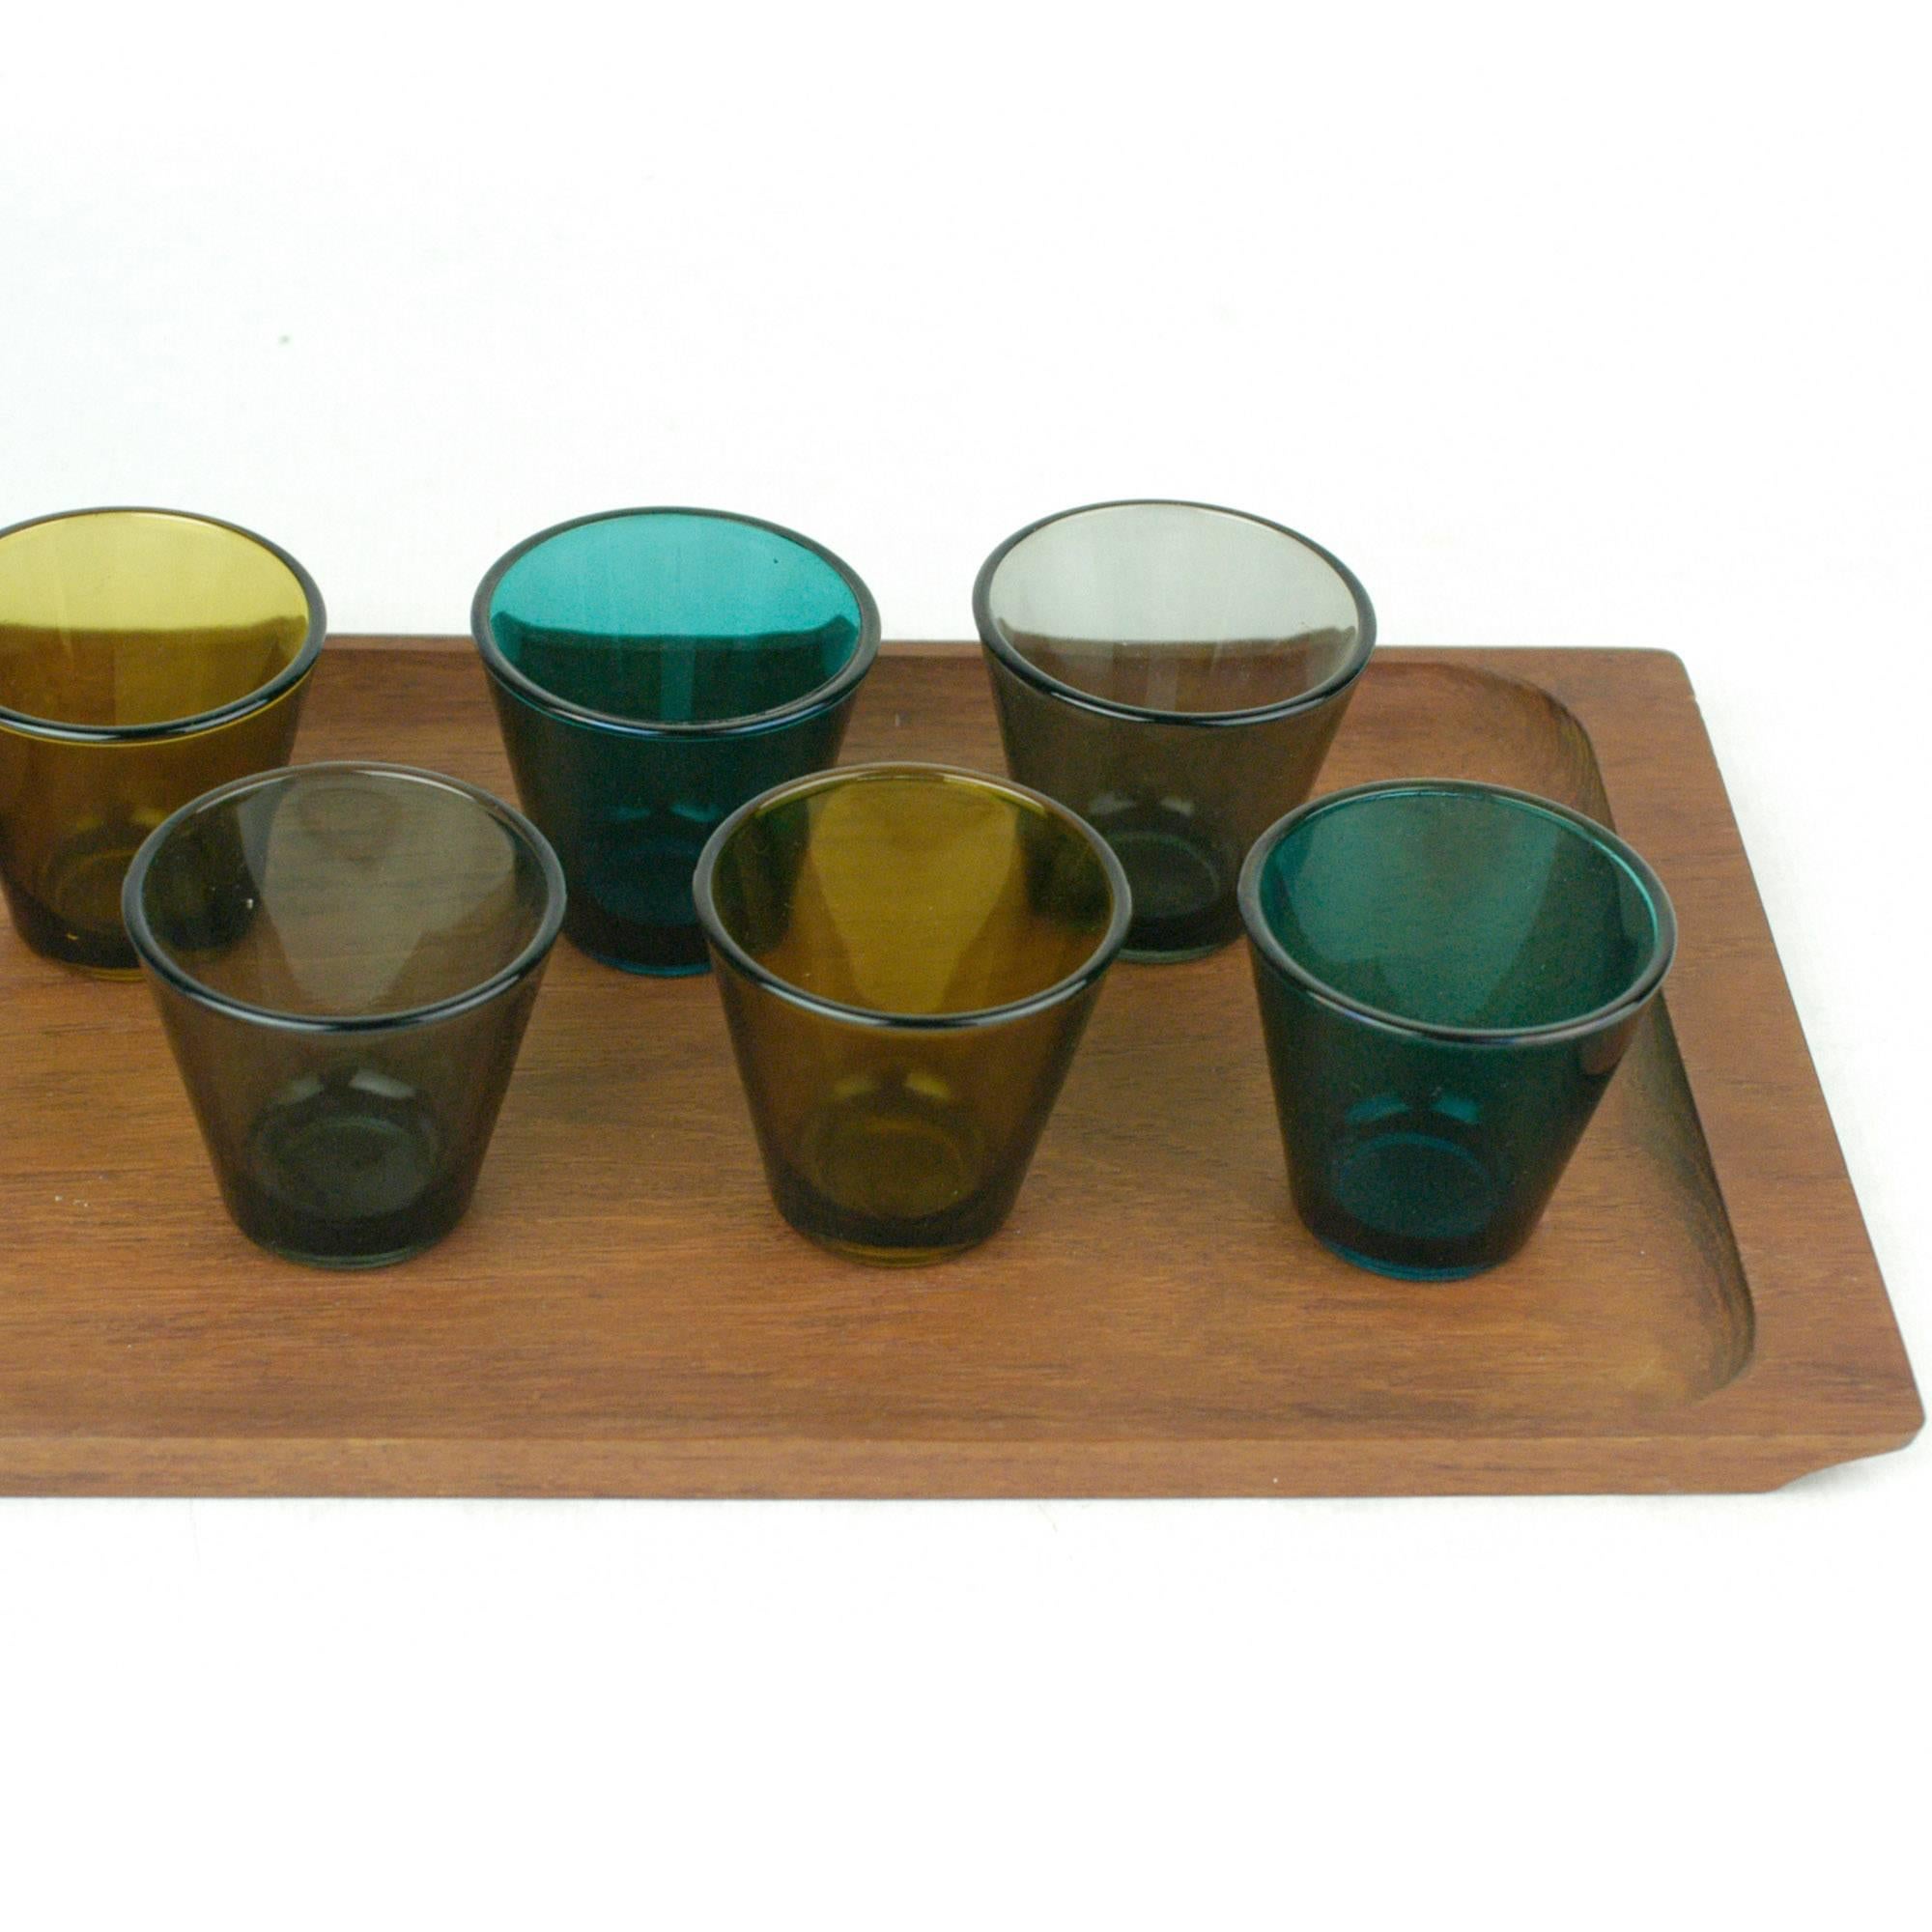 Charming set of iconic Scandinavian Modern liquor glasses in different colors with matching teak tray. All glasses are in perfect condition. They are designed by the finish Designer Kaj Franck and are part of the iconic model Kartio glass series